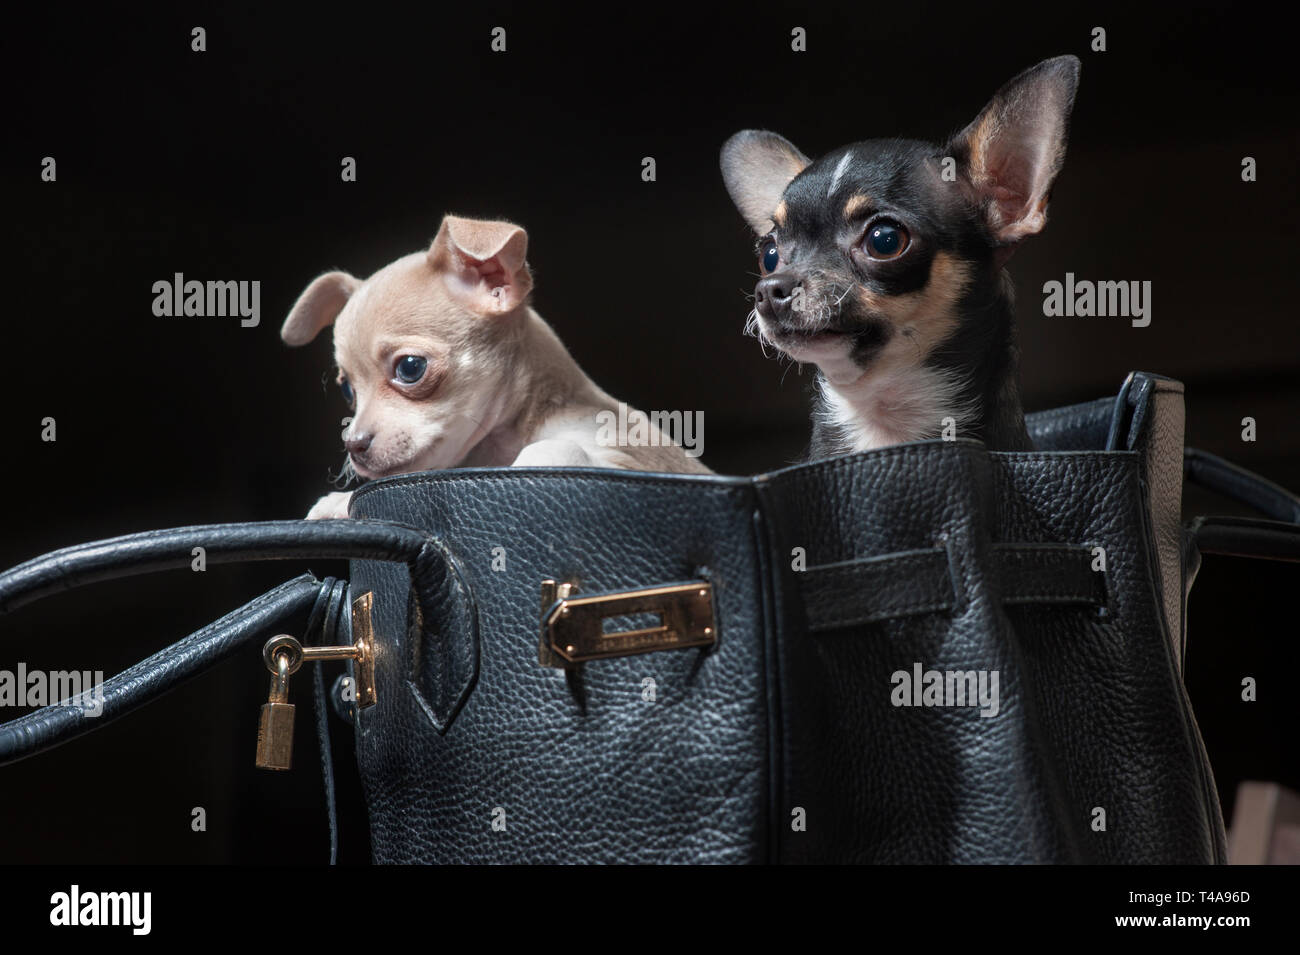 Two small chihuahua dogs in a black designer purse Stock Photo - Alamy